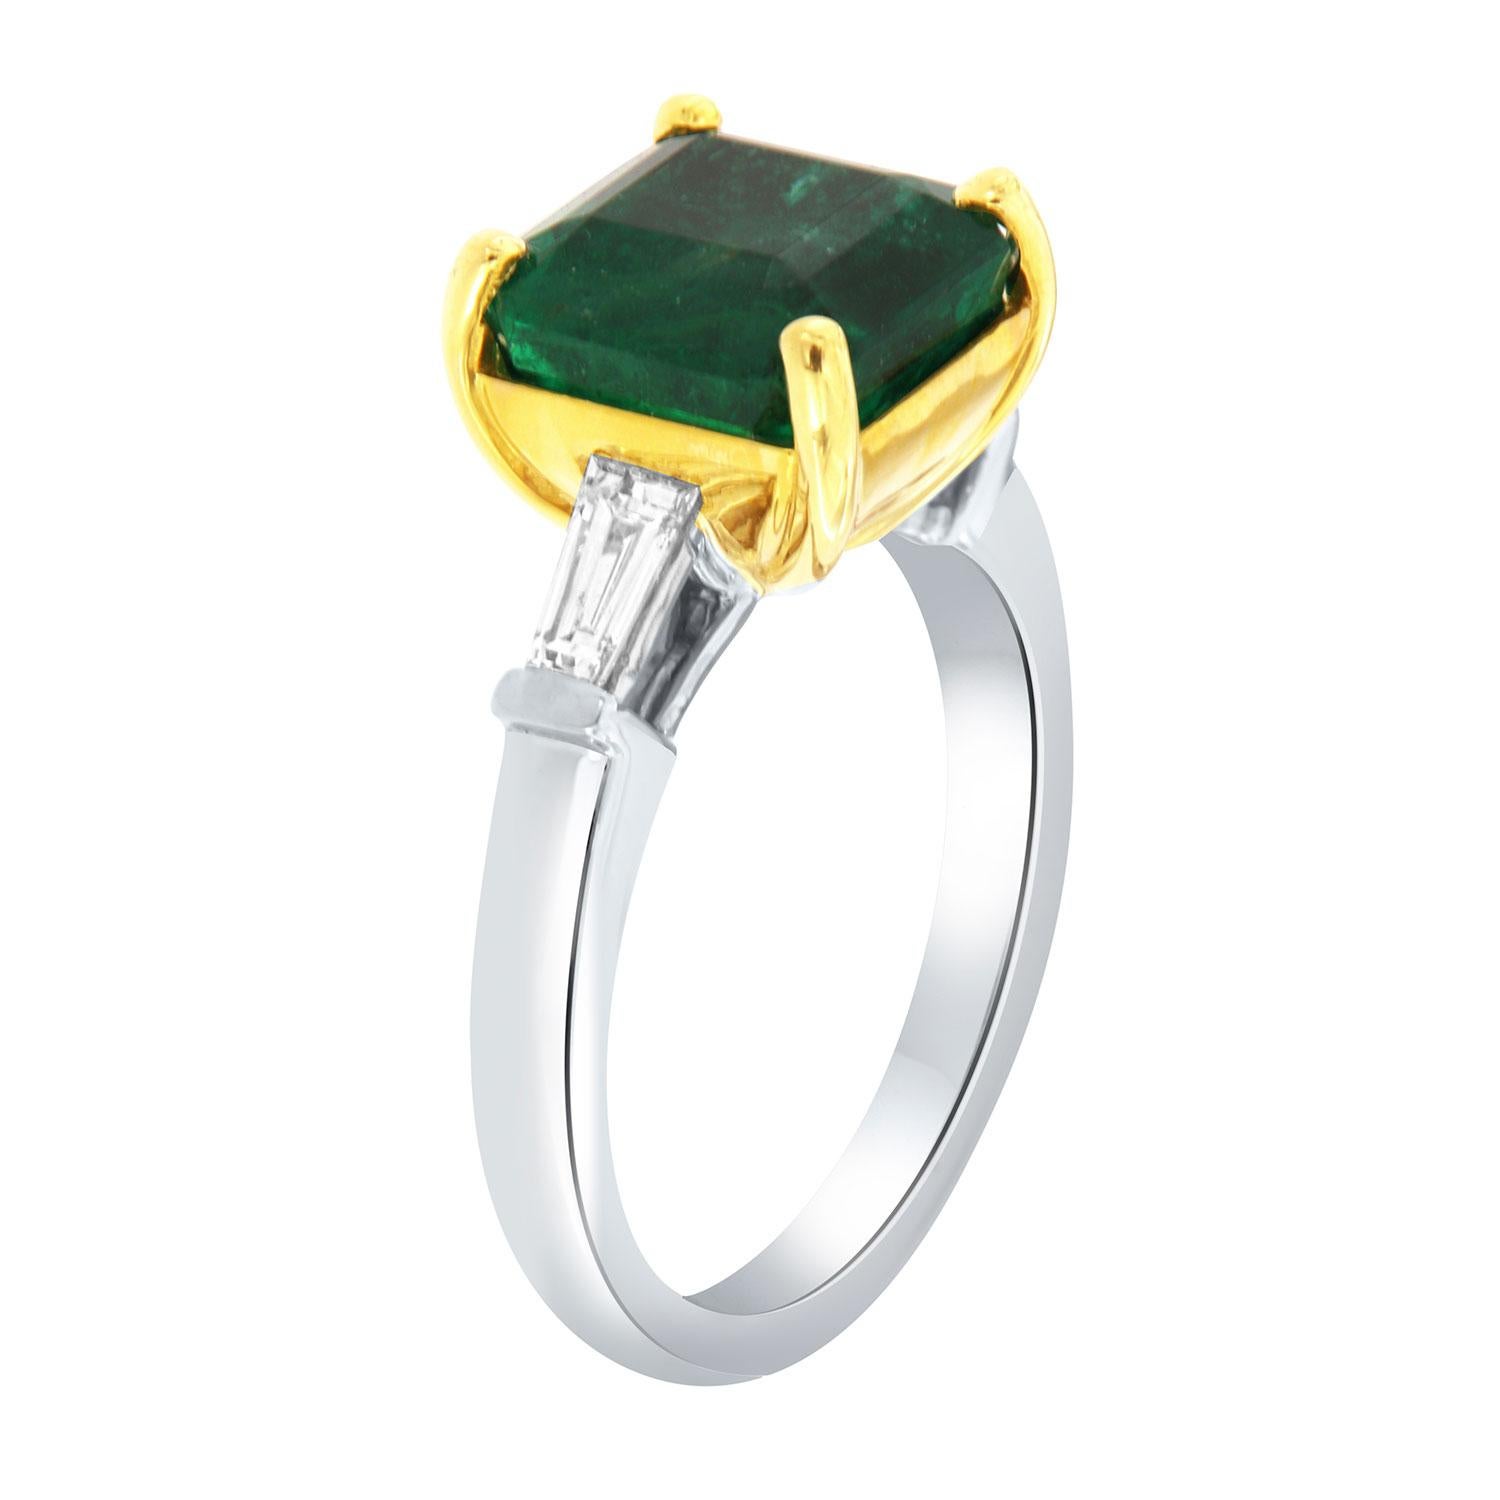 This classic Platinum and 18k Yellow gold ring features a 4.55 Carat Asscher cut shaped vibrant green Natural Emerald flanked by two(2) Baguette-shaped diamonds in a total weight of 0.34 Carat on a 2.8 mm wide band. 
This Zambian Emerald exhibits